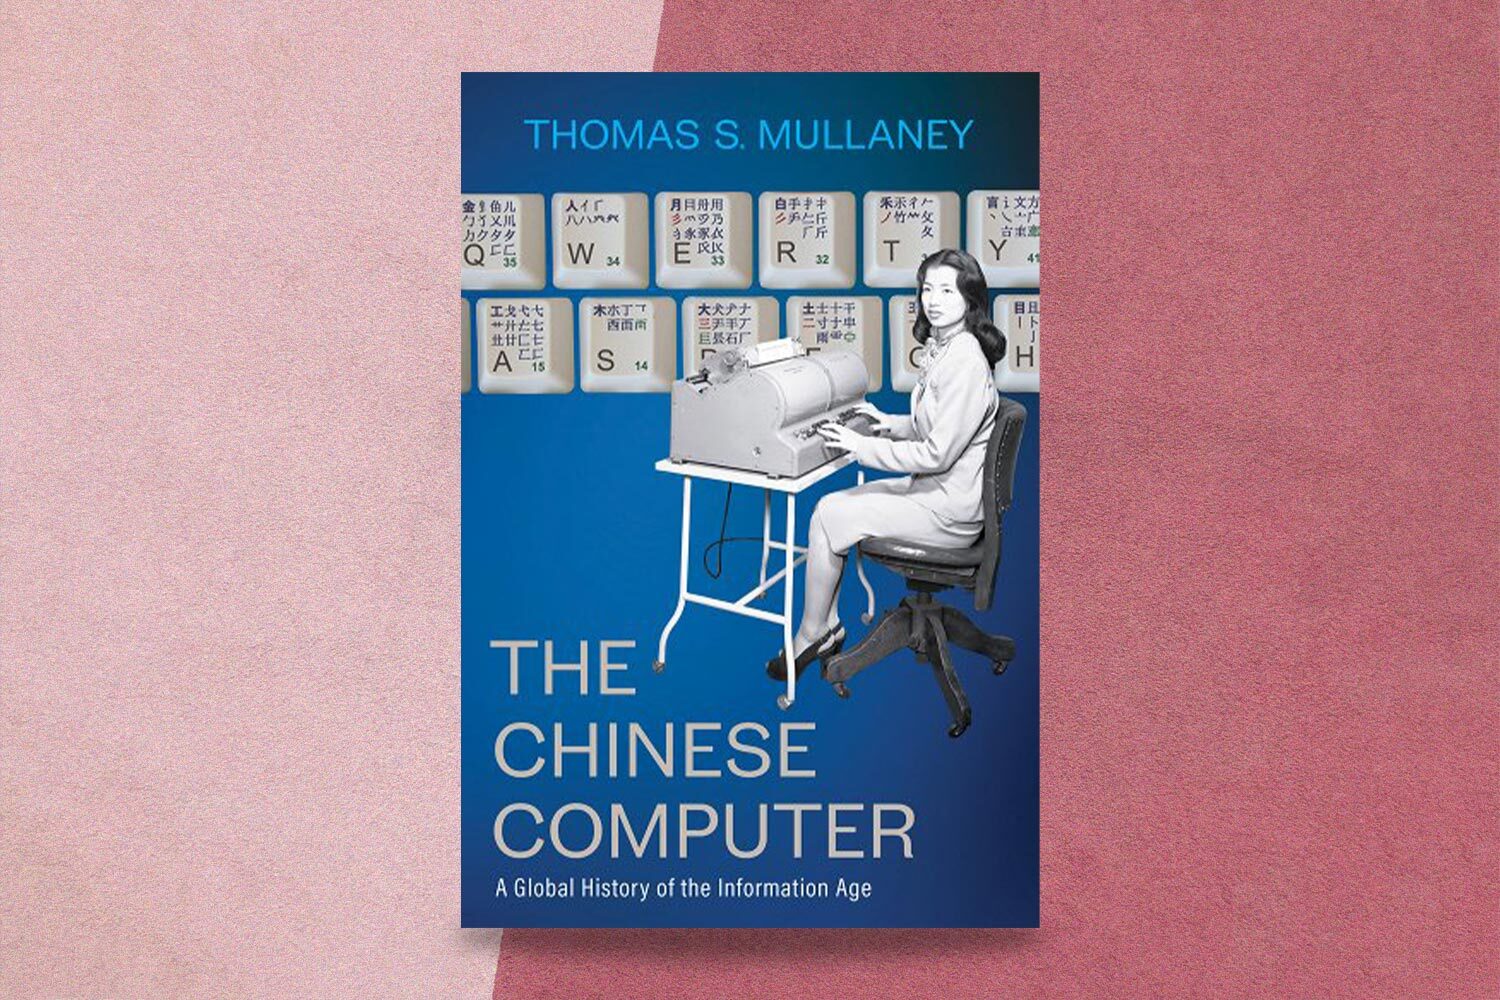 Thomas S. Mullaney, The Chinese Computer: A Global History of the Information Age 